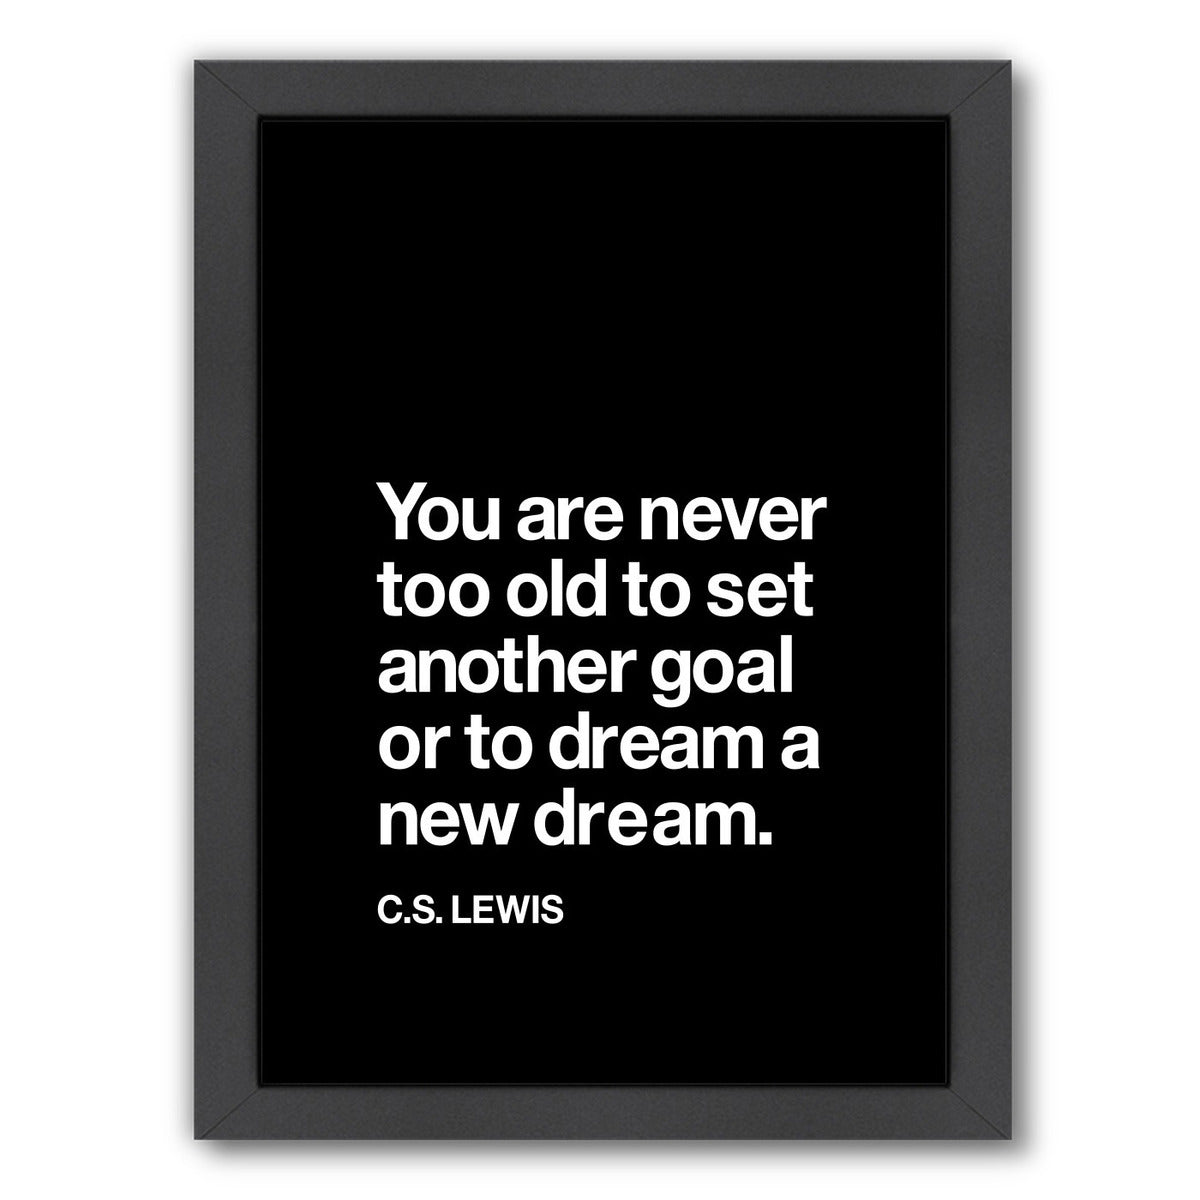 Cs Lewis by Motivated Type Framed Print - Americanflat